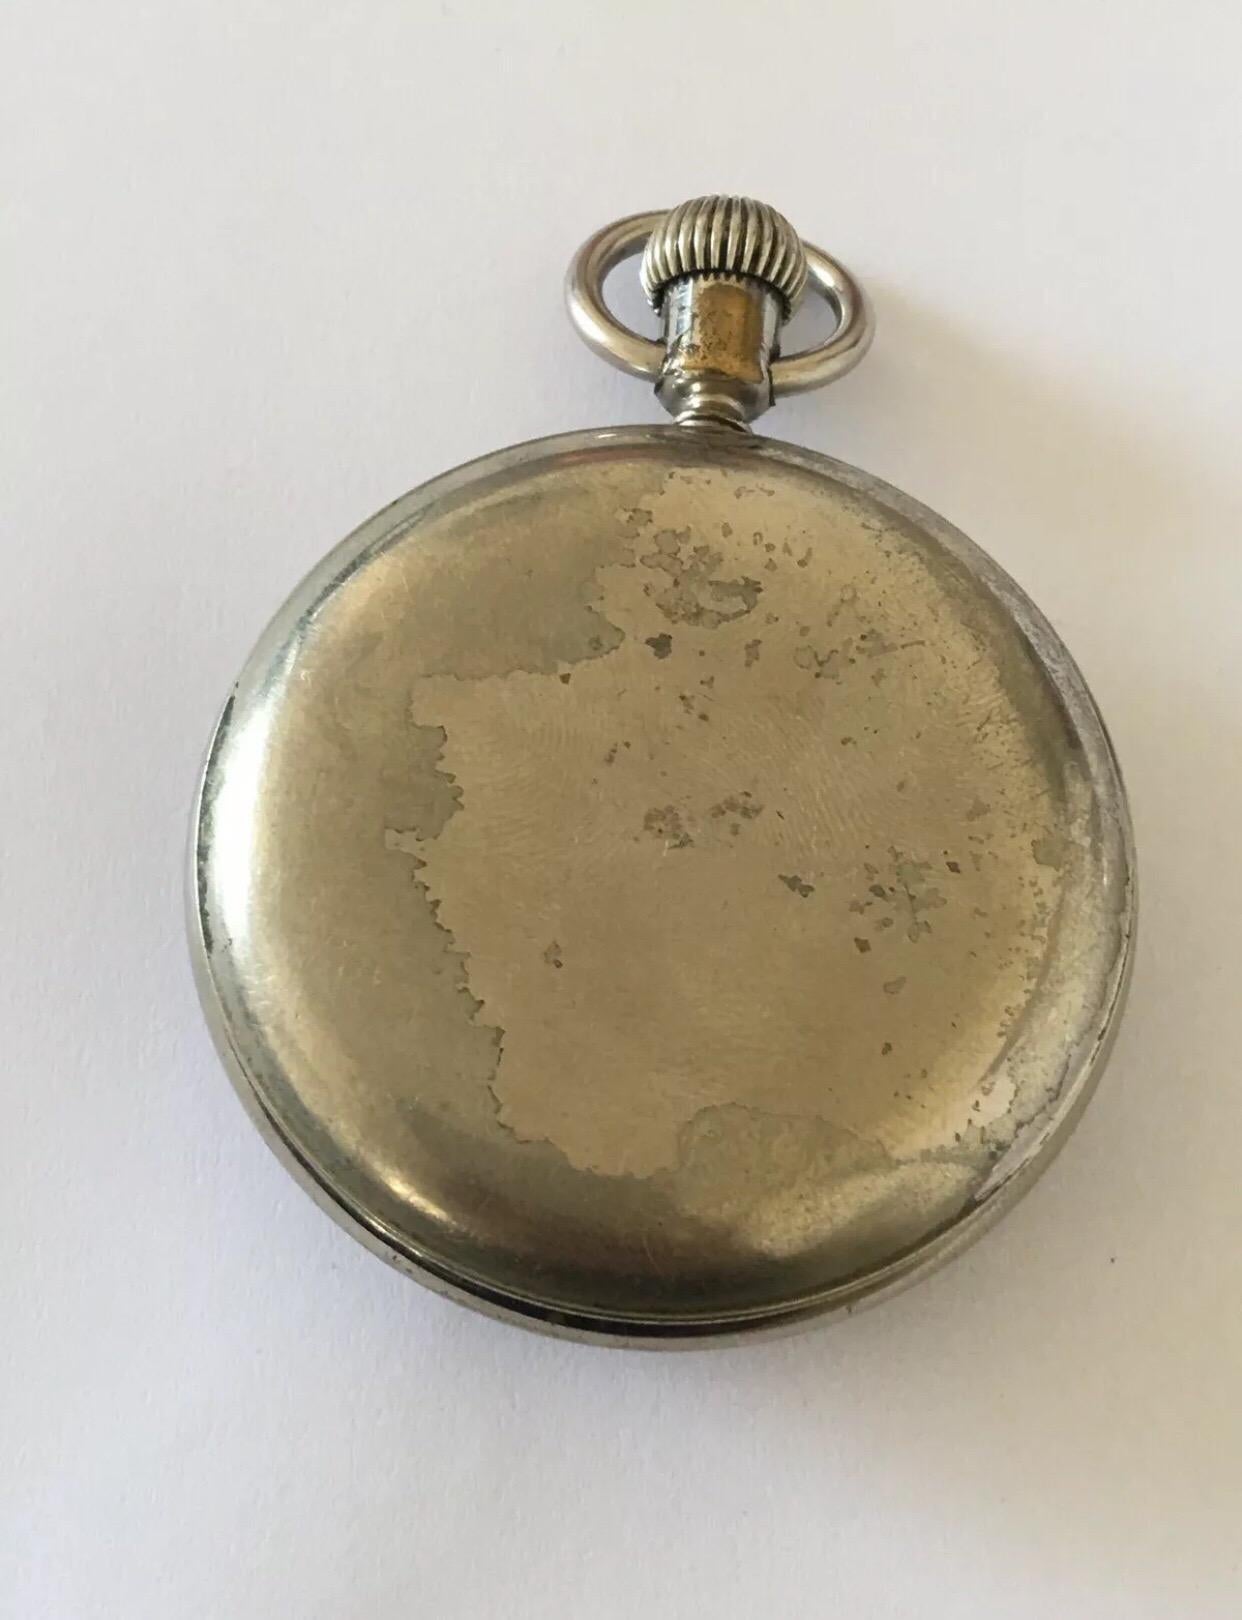 
Antique Duplex Escapement Pocket Watch Signed The Waterbury Watch Co.


This watch is working and ticking nicely. Considering the age of this antique watch, I cannot guarantee the timing is accurate. The back cover is worn / tarnished as shown on